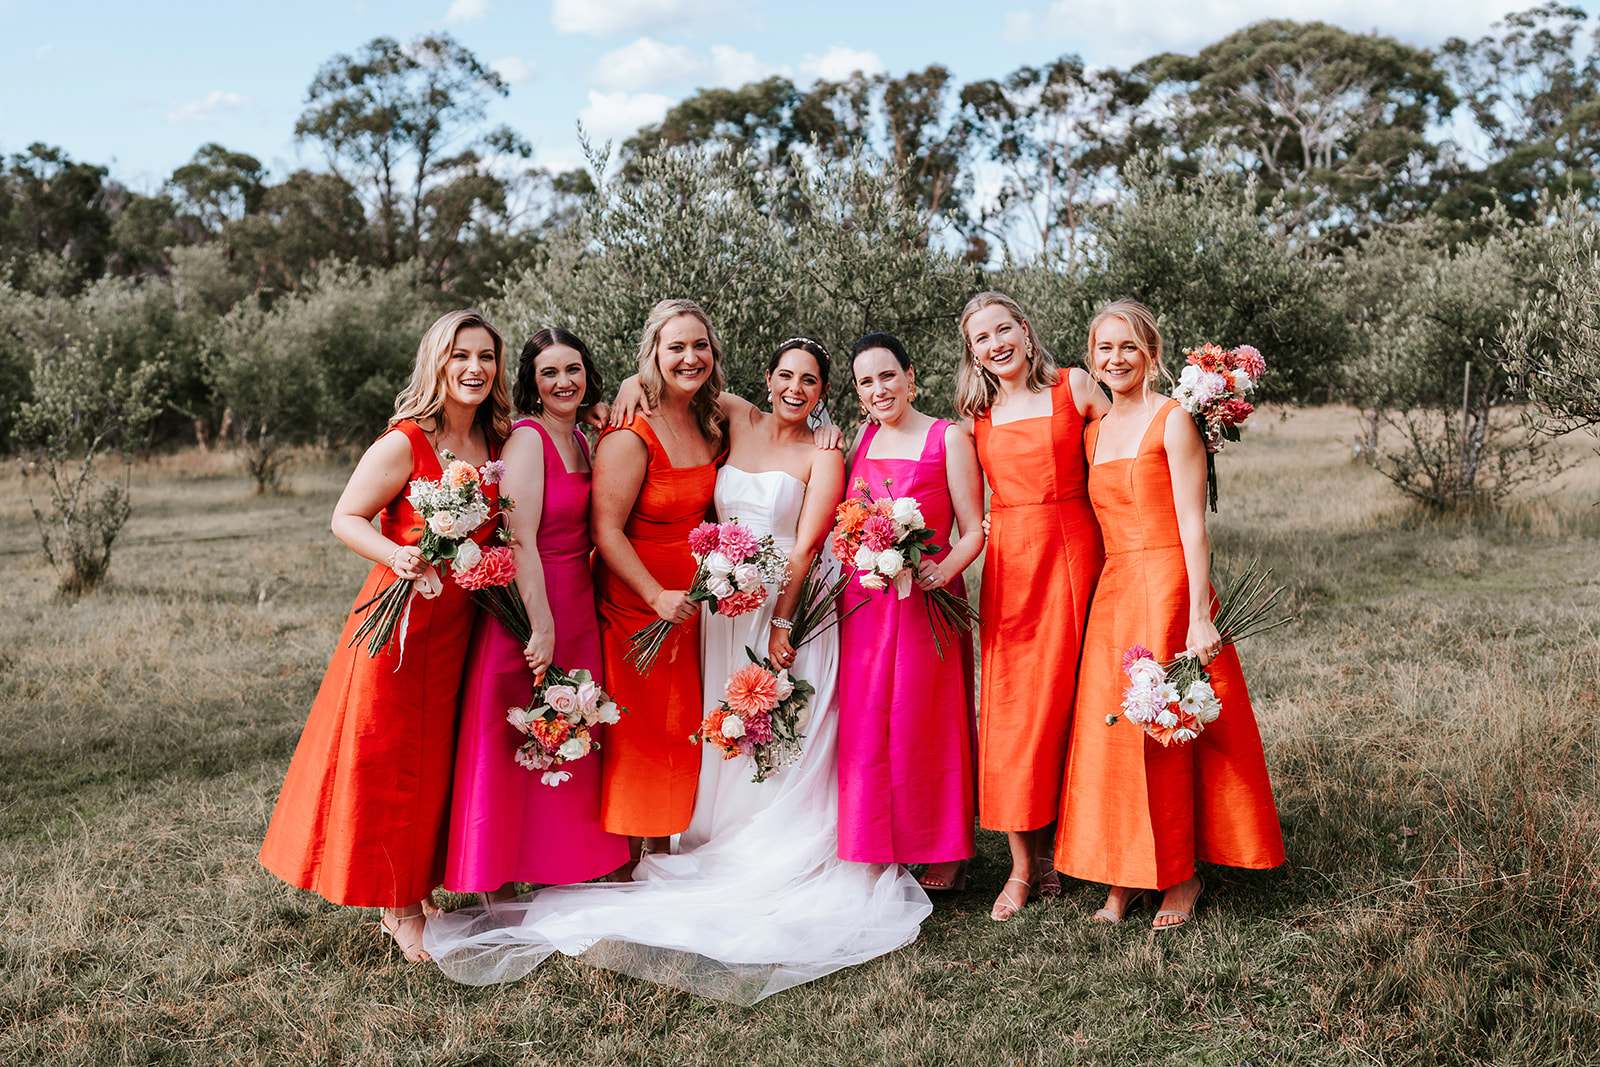 Bride and bridesmaids standing together